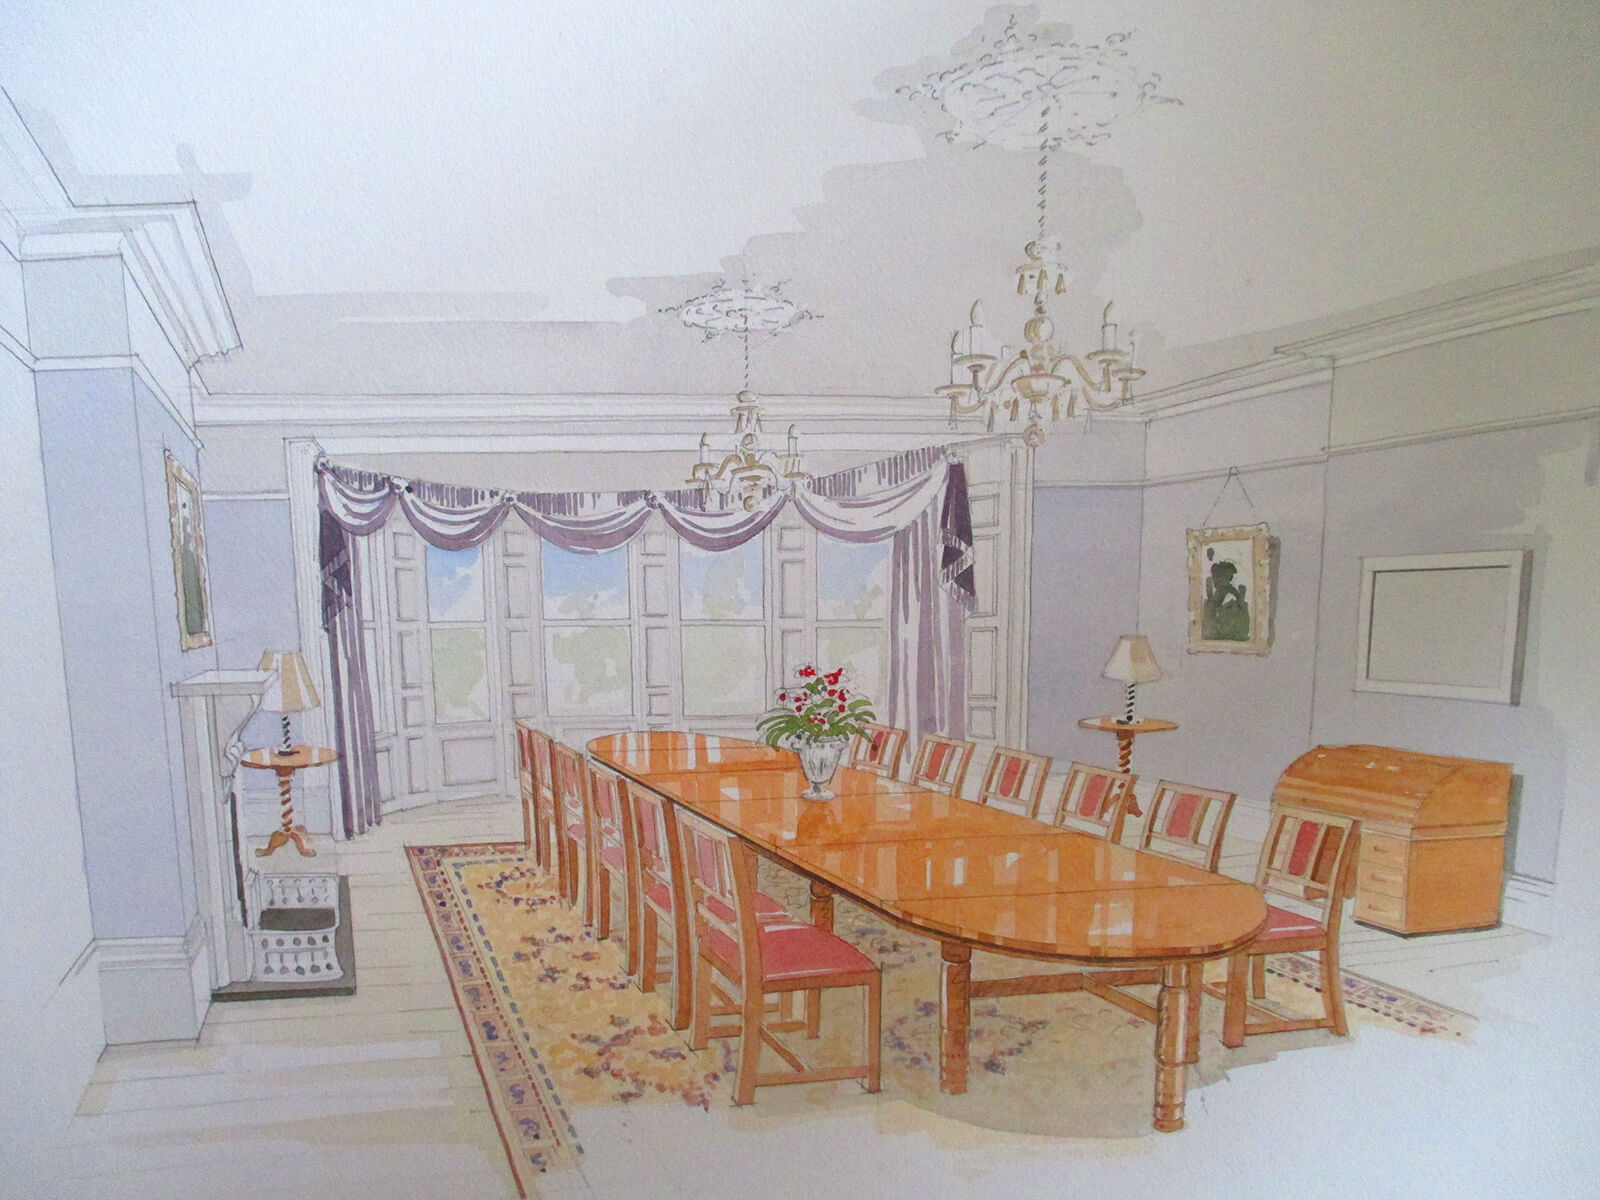 Watercolour created to demonstrate interior of conference suite, The Mansion House, Clifton, Bristol. - i.d.space